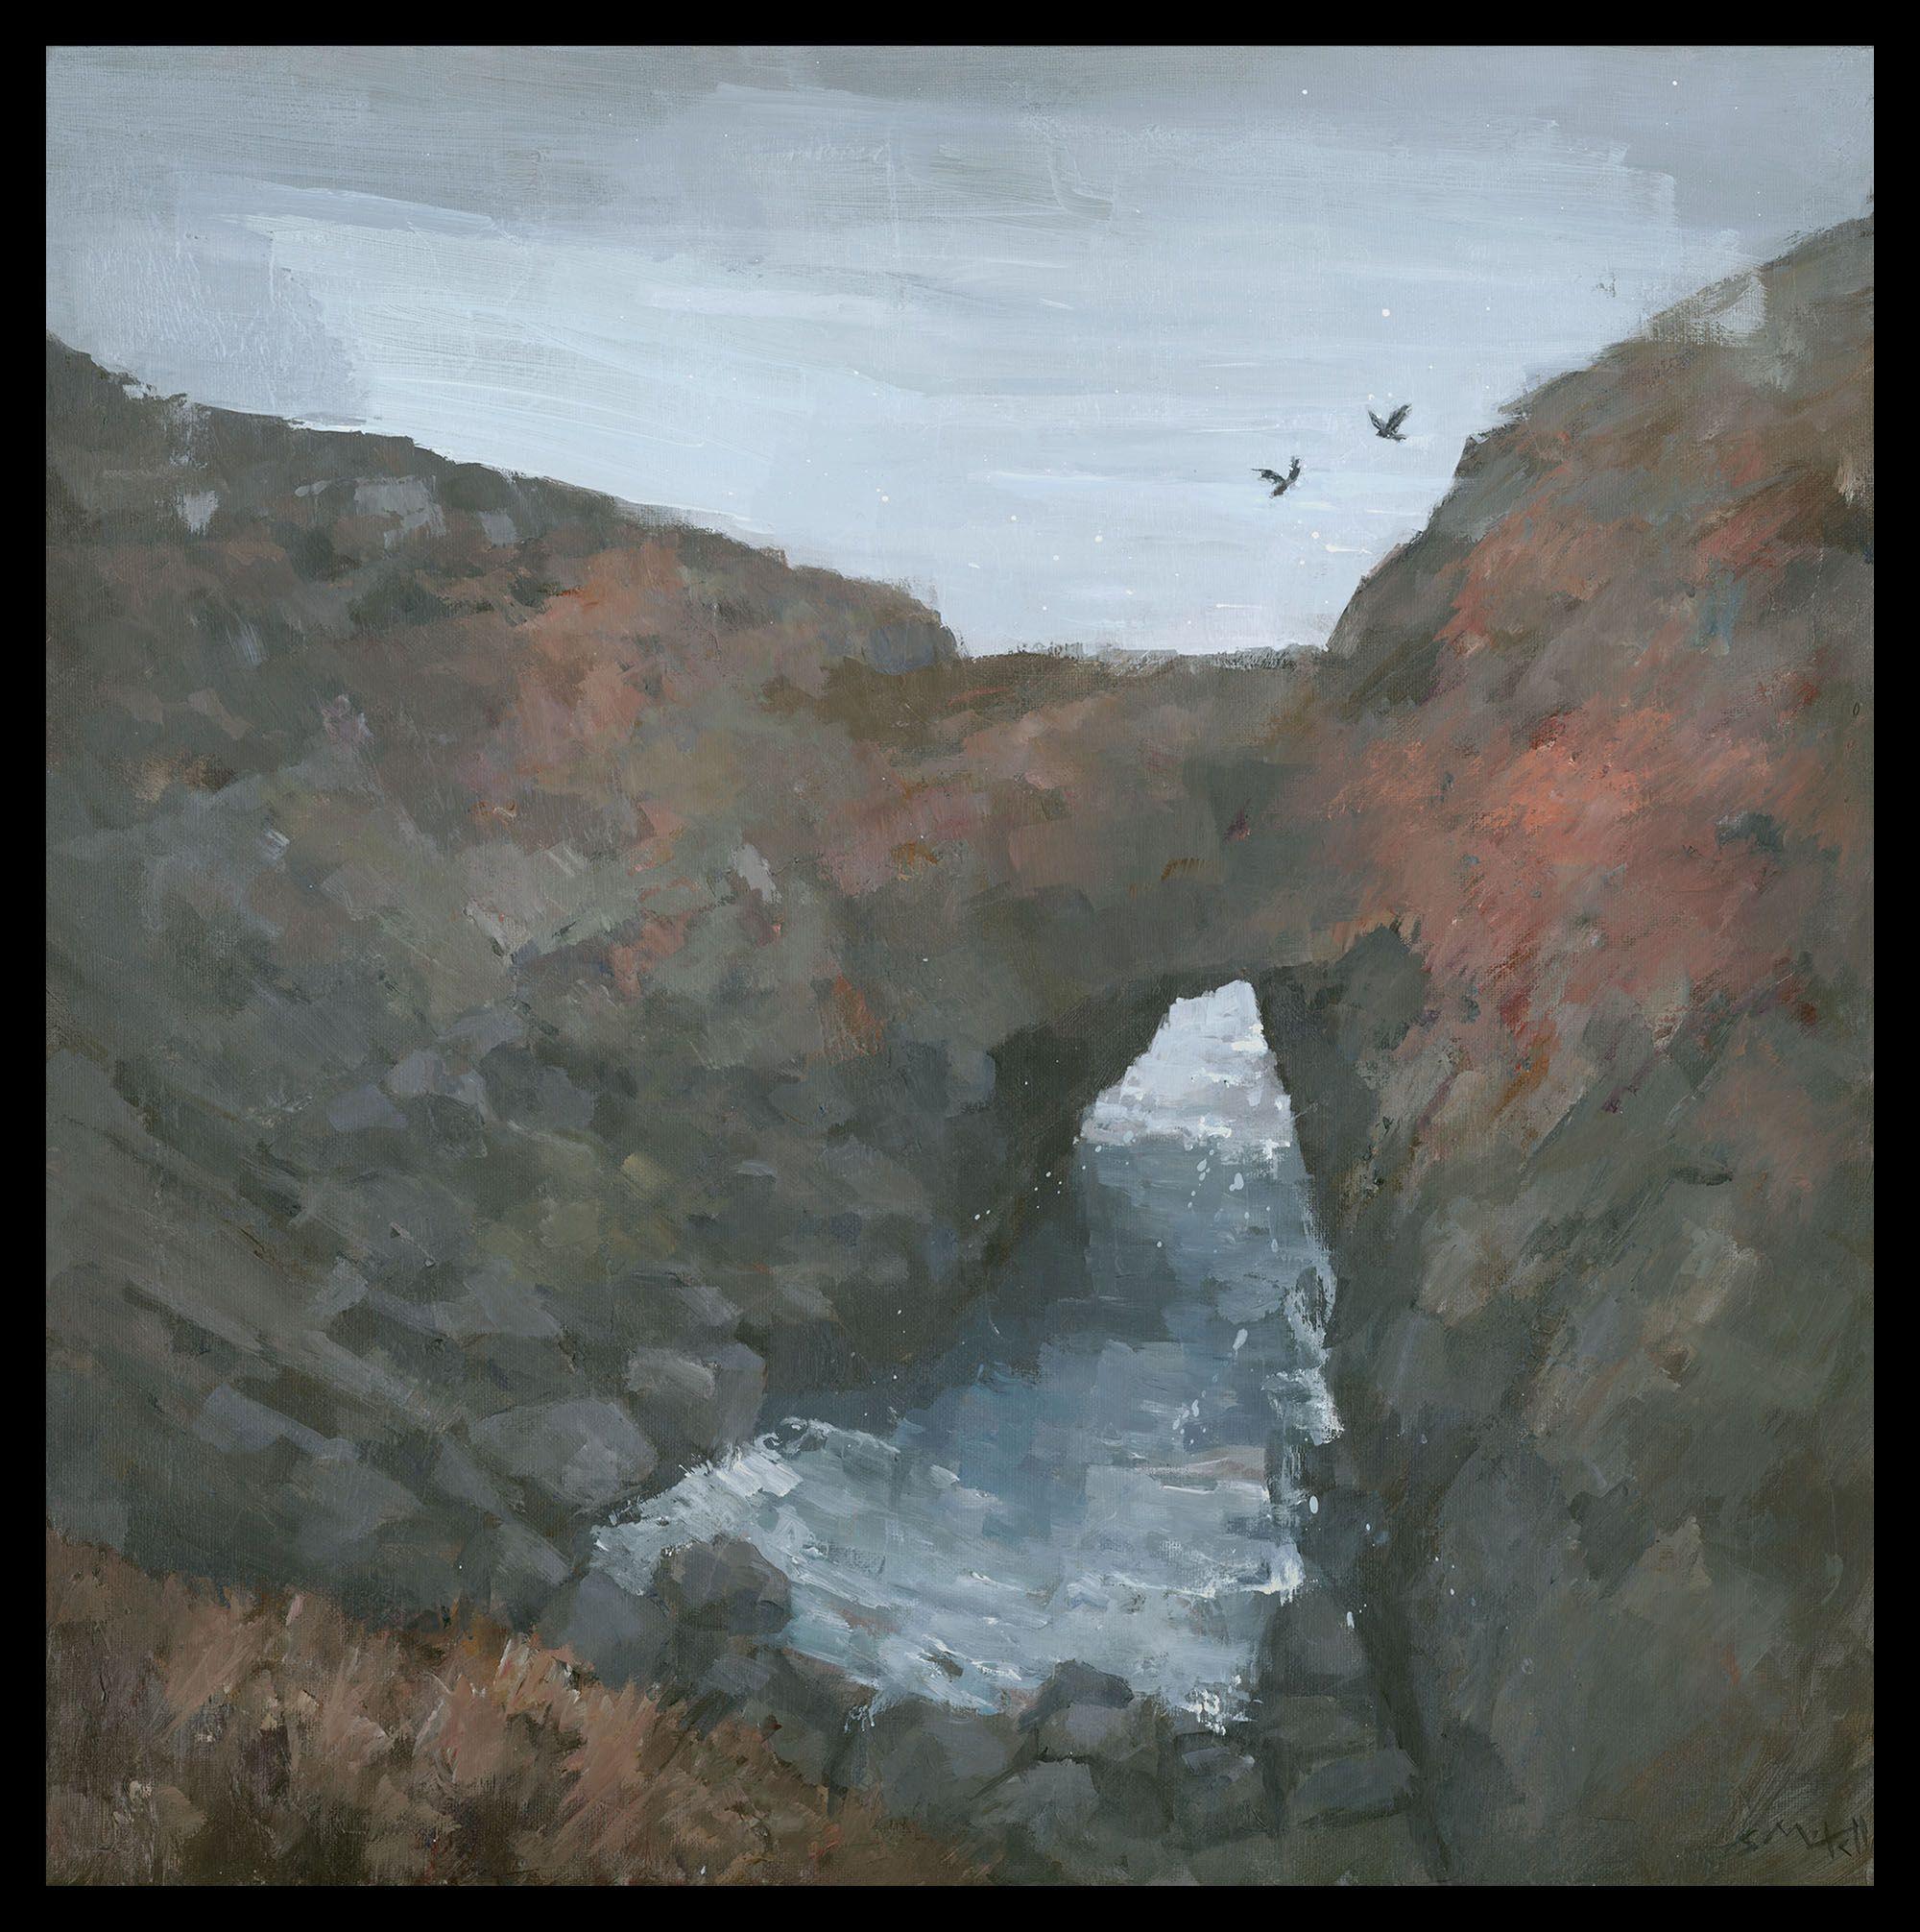 This is an original painting of The Devils Frying Pan, near Cadgwith. The Devils Frying Pan was formed when a sea cave collapsed, leaving just the arch. When the weather is especially rough, the sea appears to be bubbling and boiling, which is how